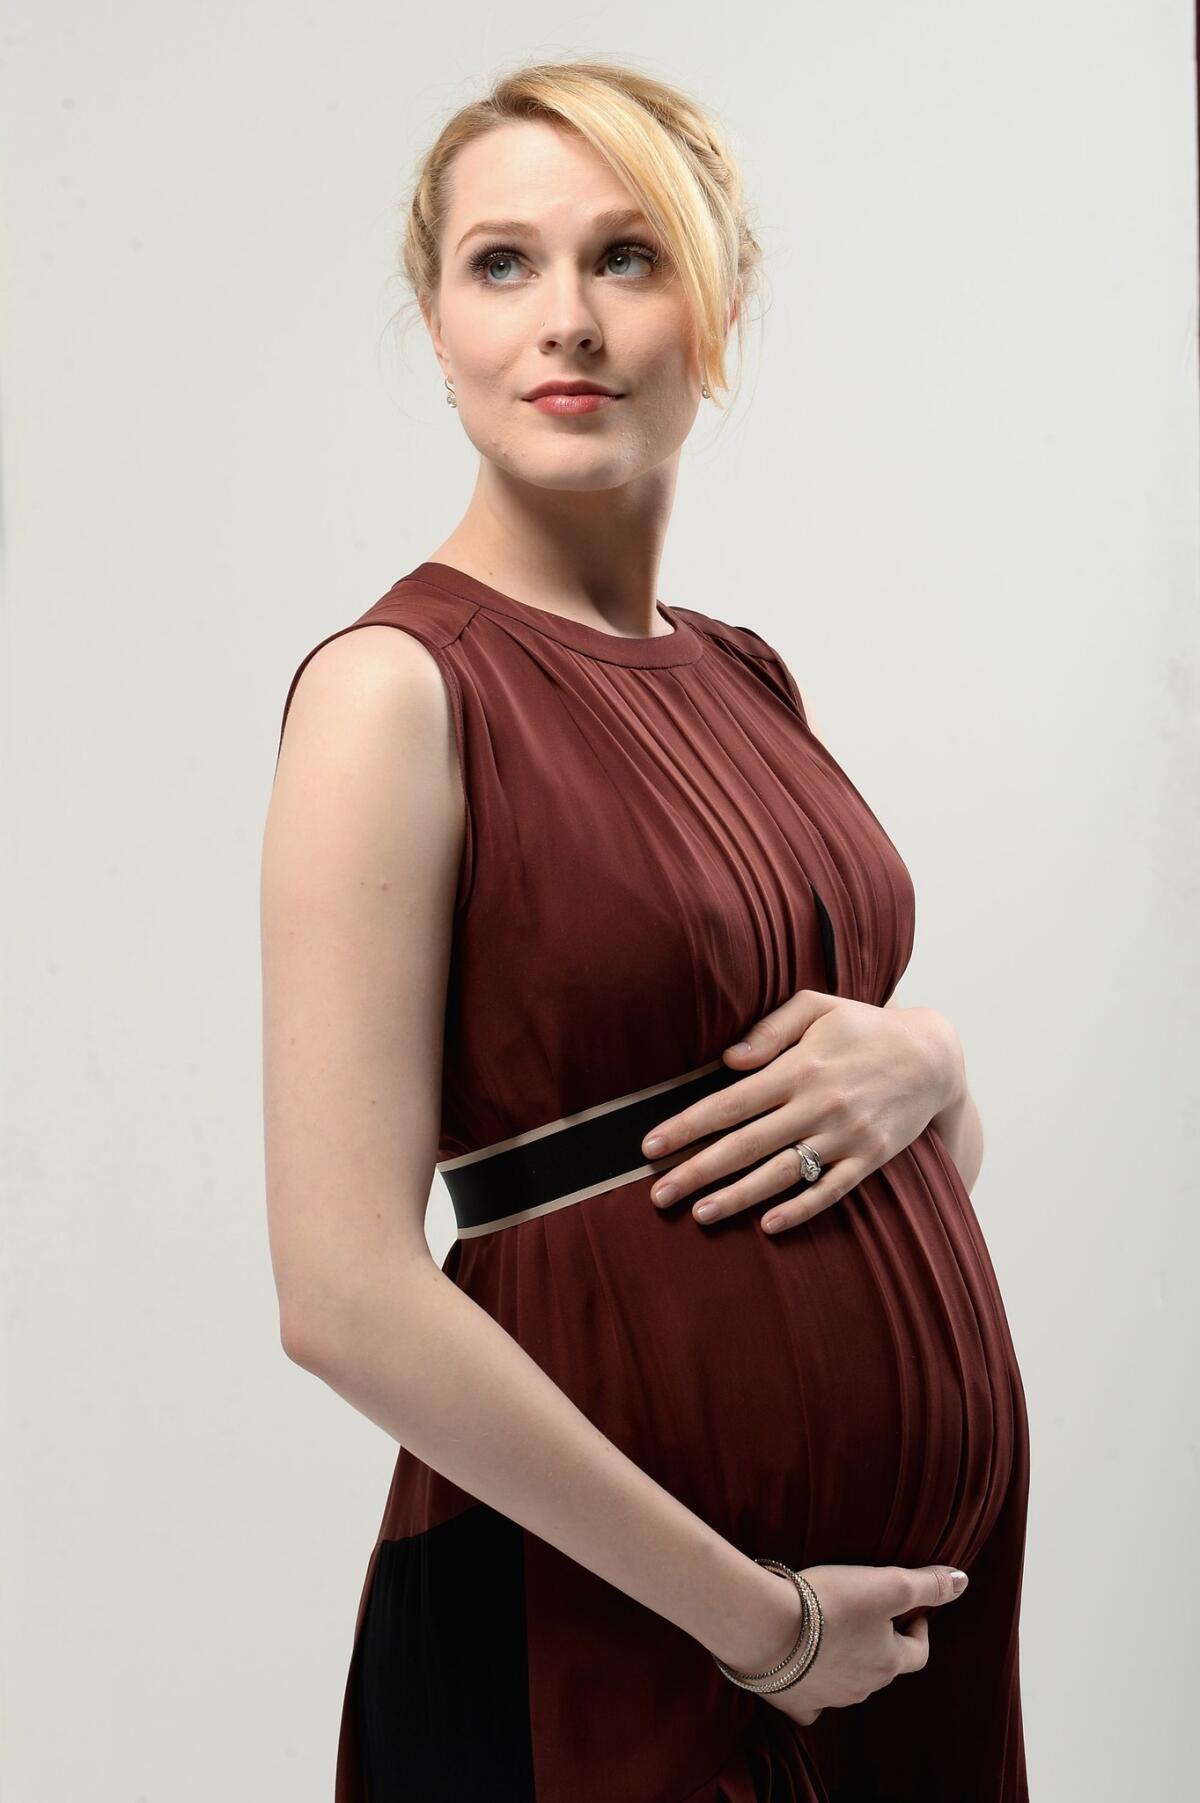 Actress Evan Rachel Wood has given birth to a boy. This is her first child with husband, actor Jamie Bell.